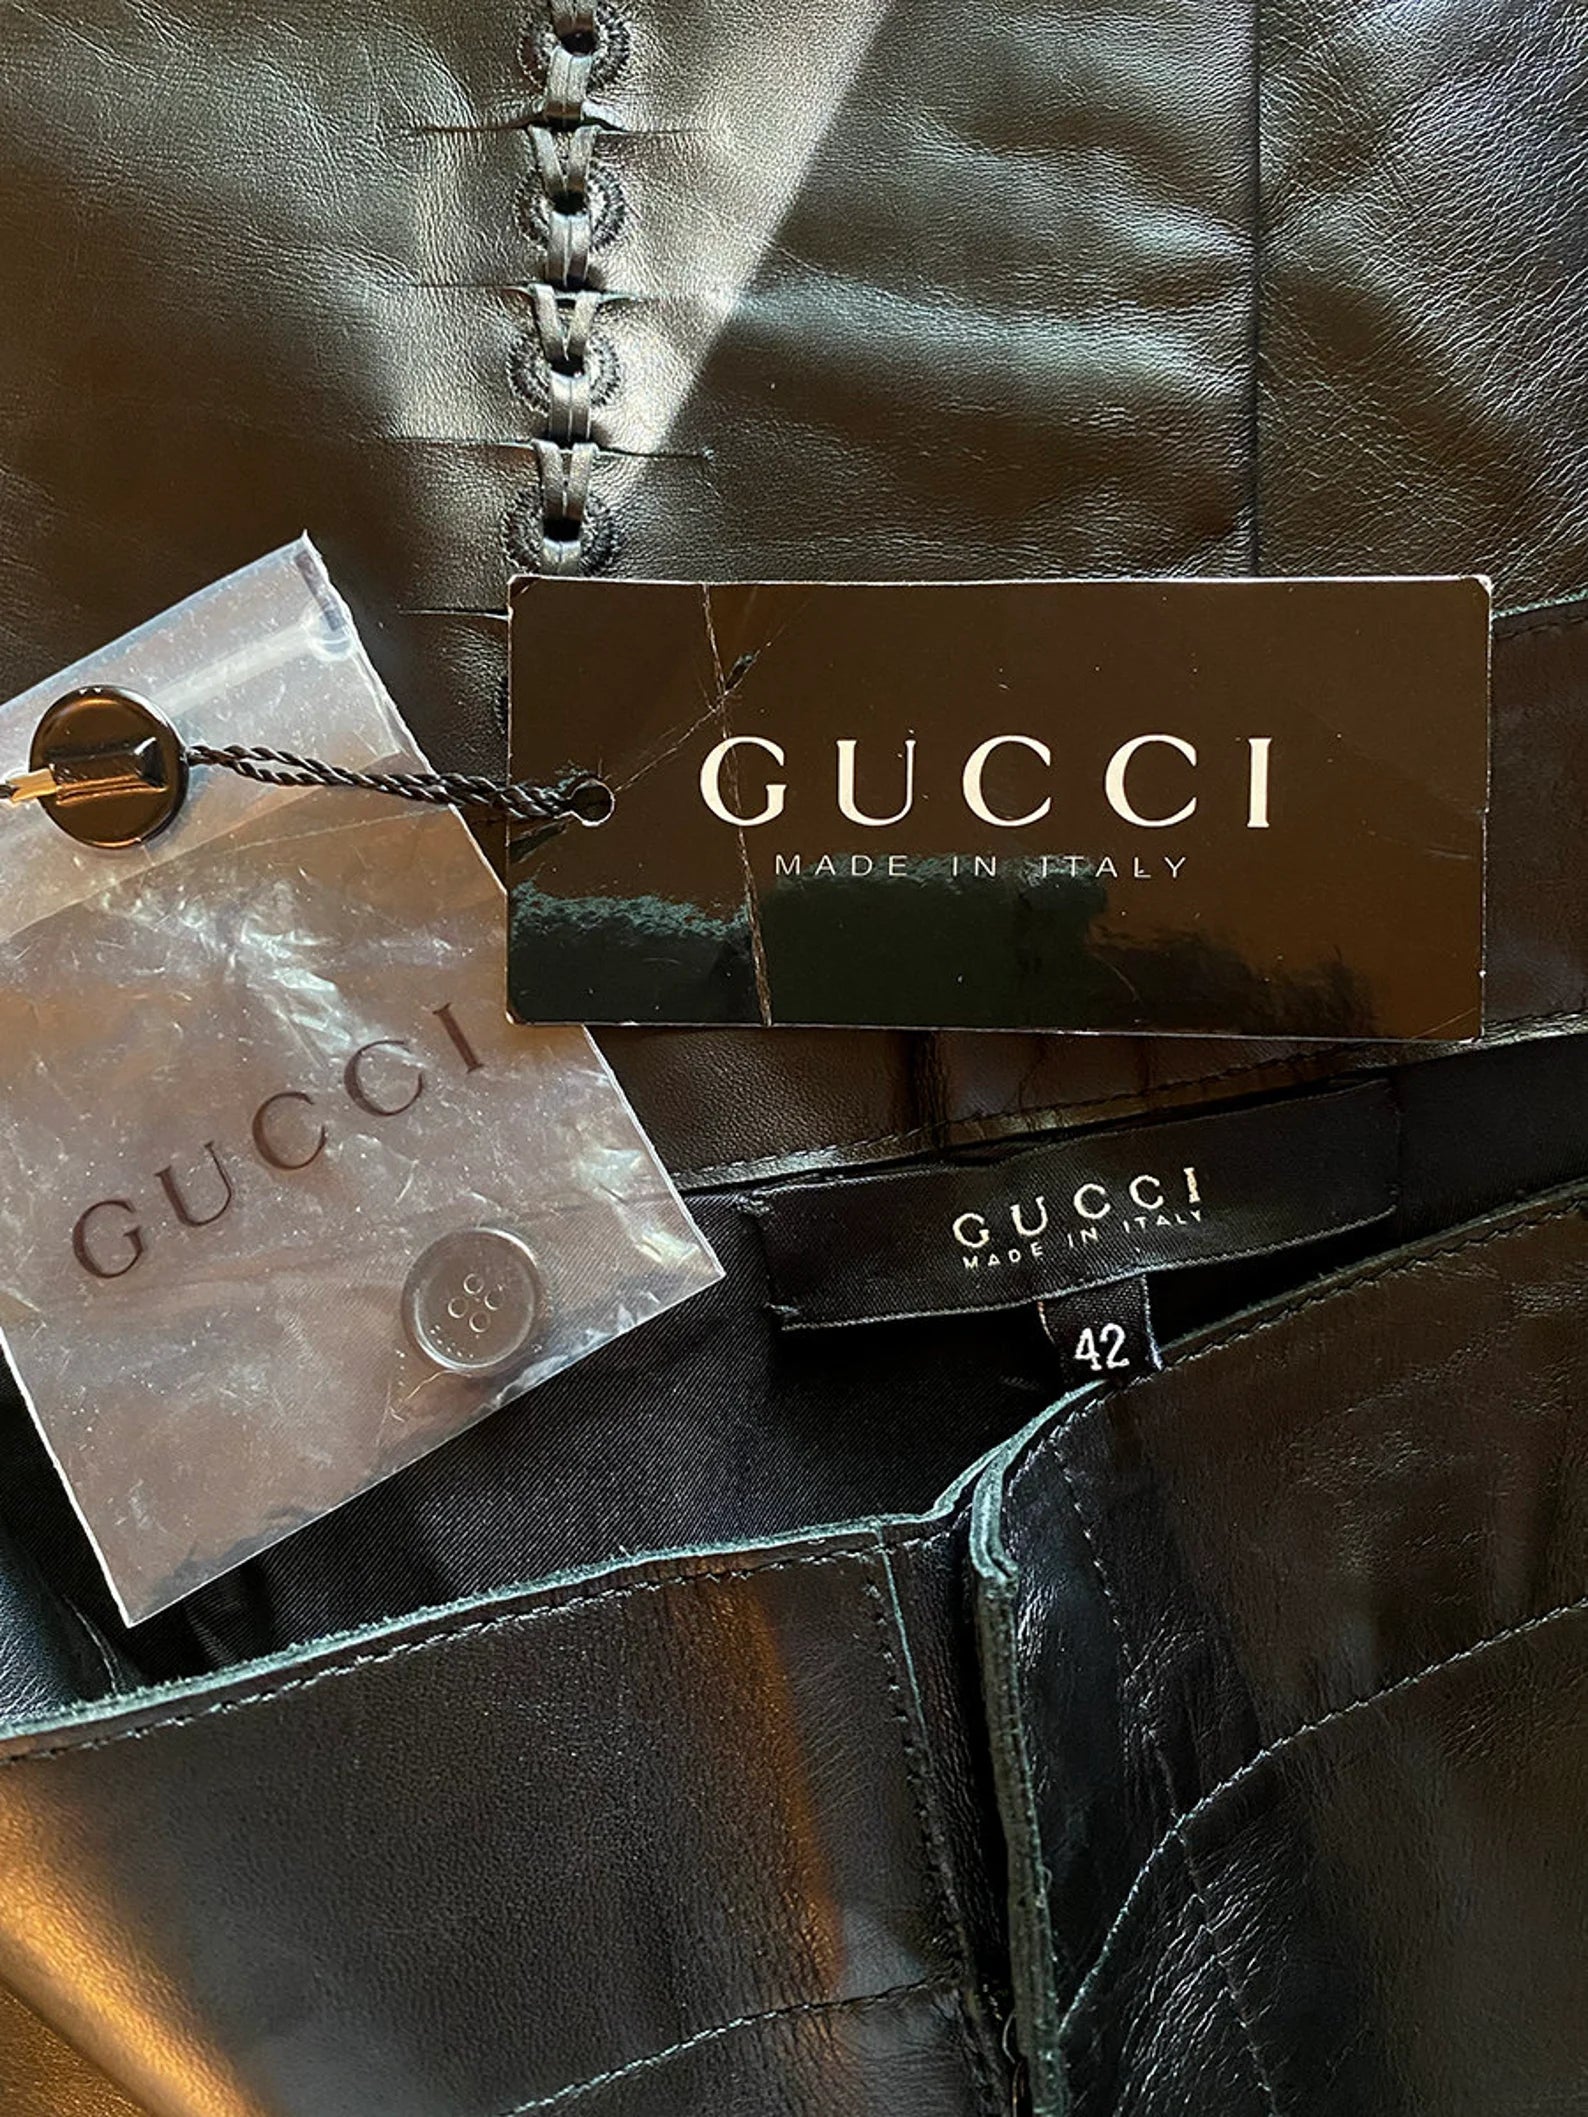 1990's Gucci Leather Pants w/ Tags